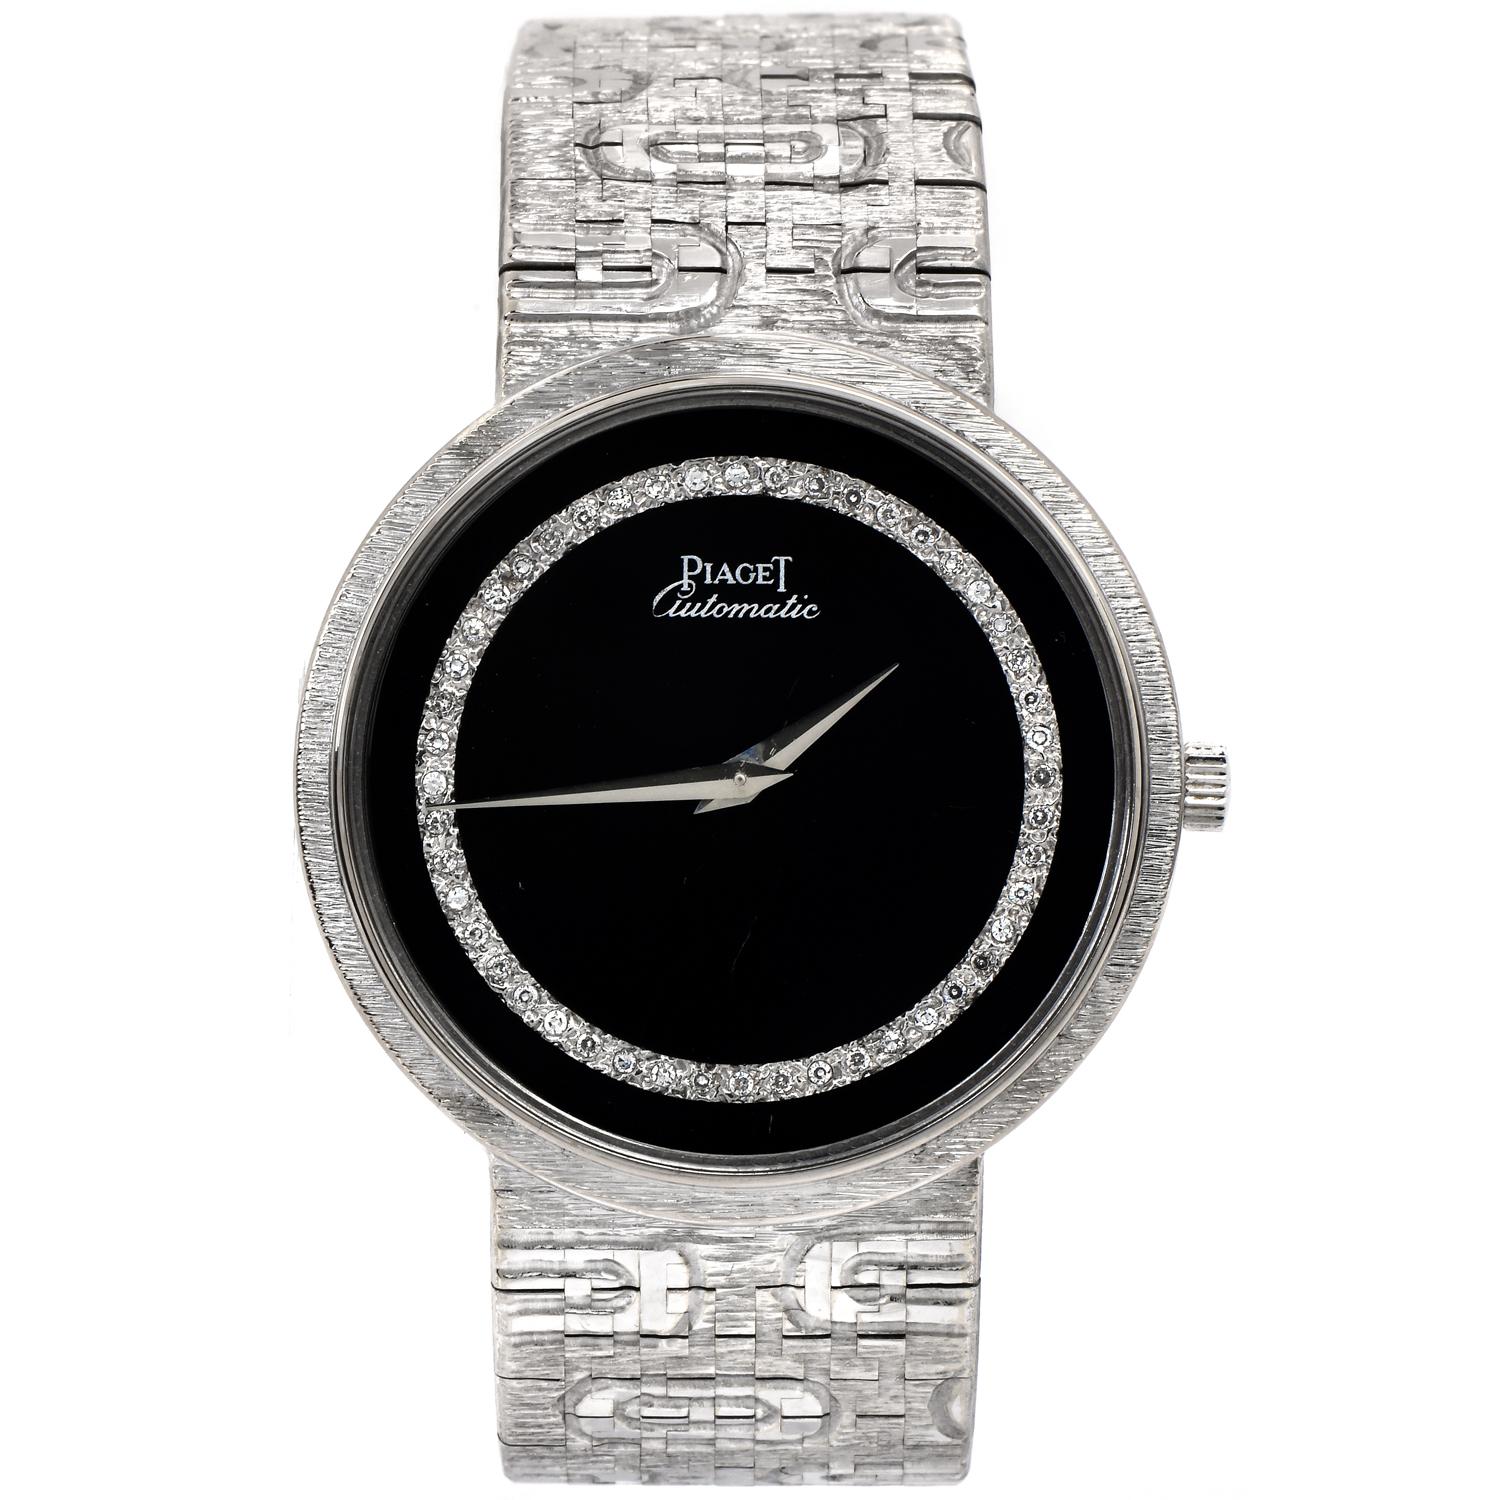 An exquisite black onyx & Diamond Dial, this Ladies Circa 1990 Piaget watch is a rare find. 

The watch case is rounded measuring 34 mm, enhanced by a black onyx dial, with a diamond halo.

The bracelet is fashioned in textured oval accented, wide,